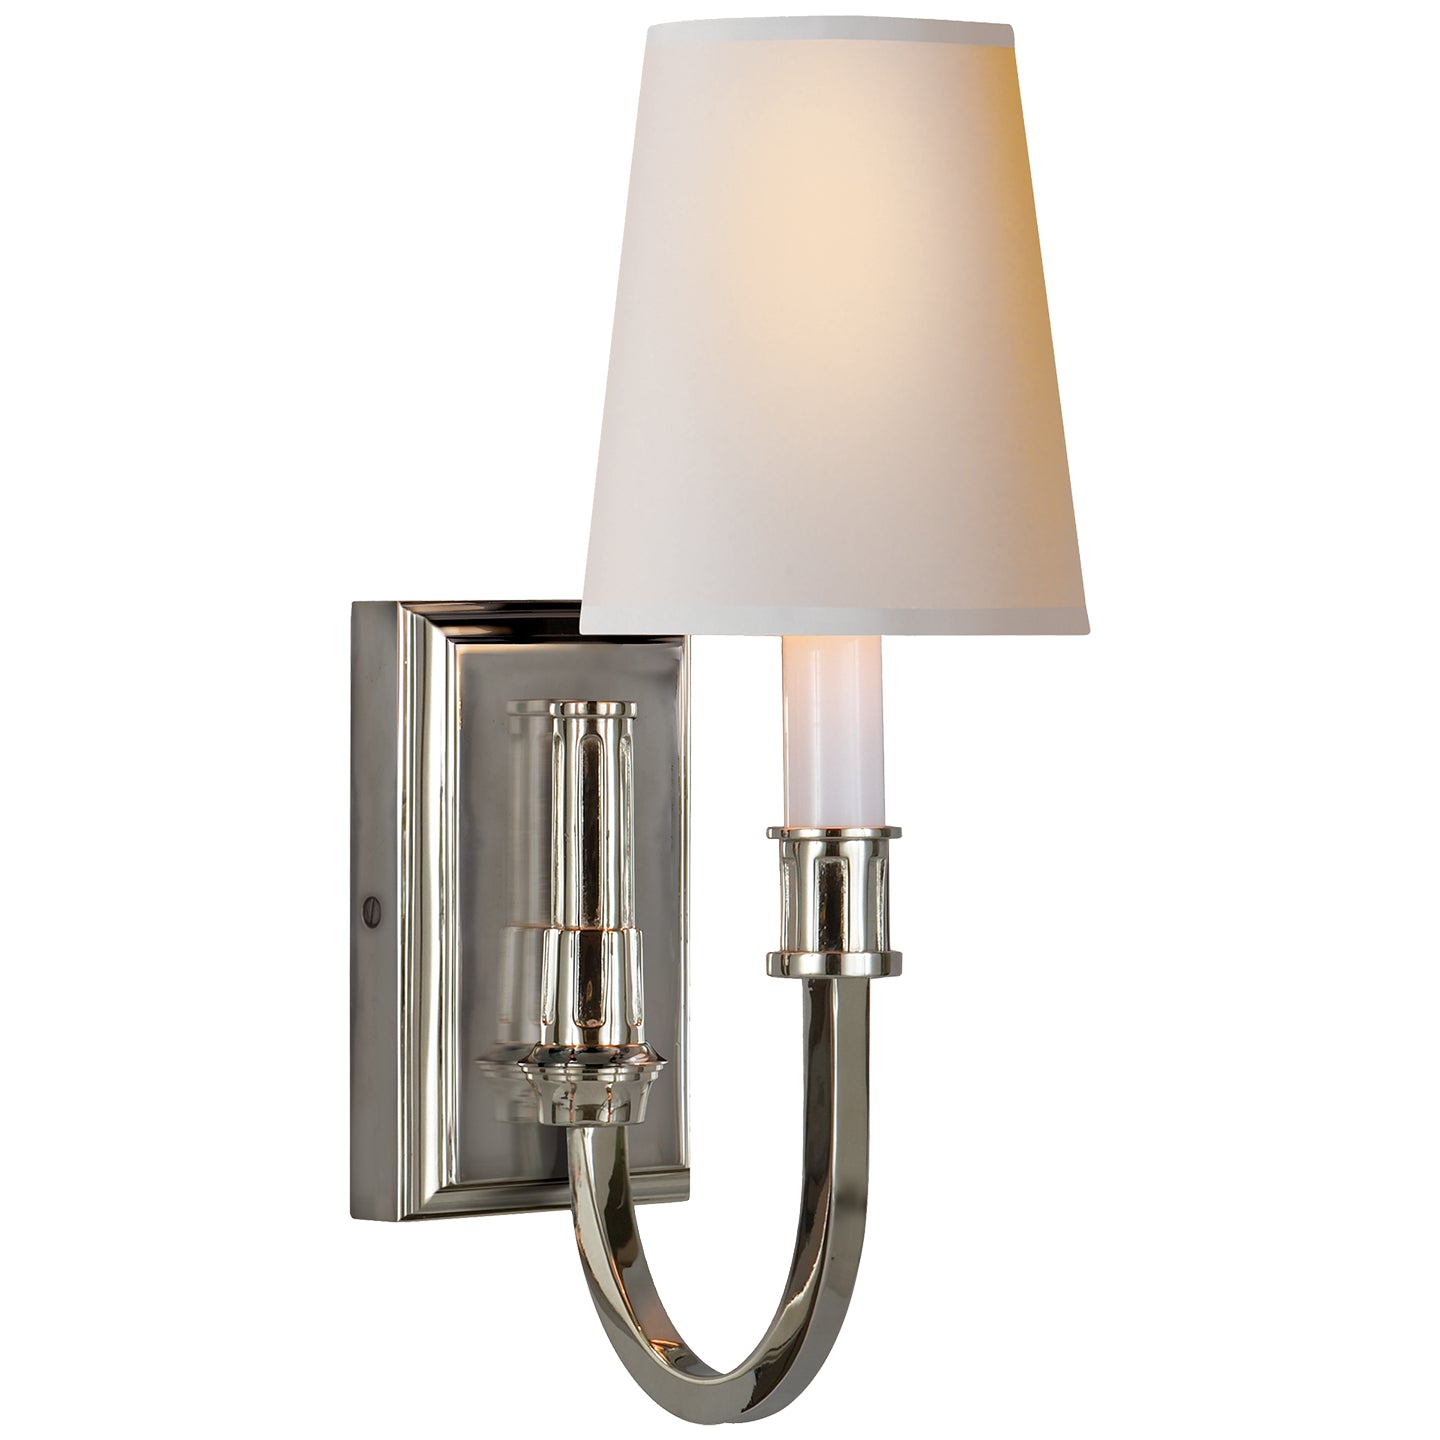 Load image into Gallery viewer, Visual Comfort Signature - TOB 2327PN-NP - One Light Wall Sconce - Modern Library - Polished Nickel
